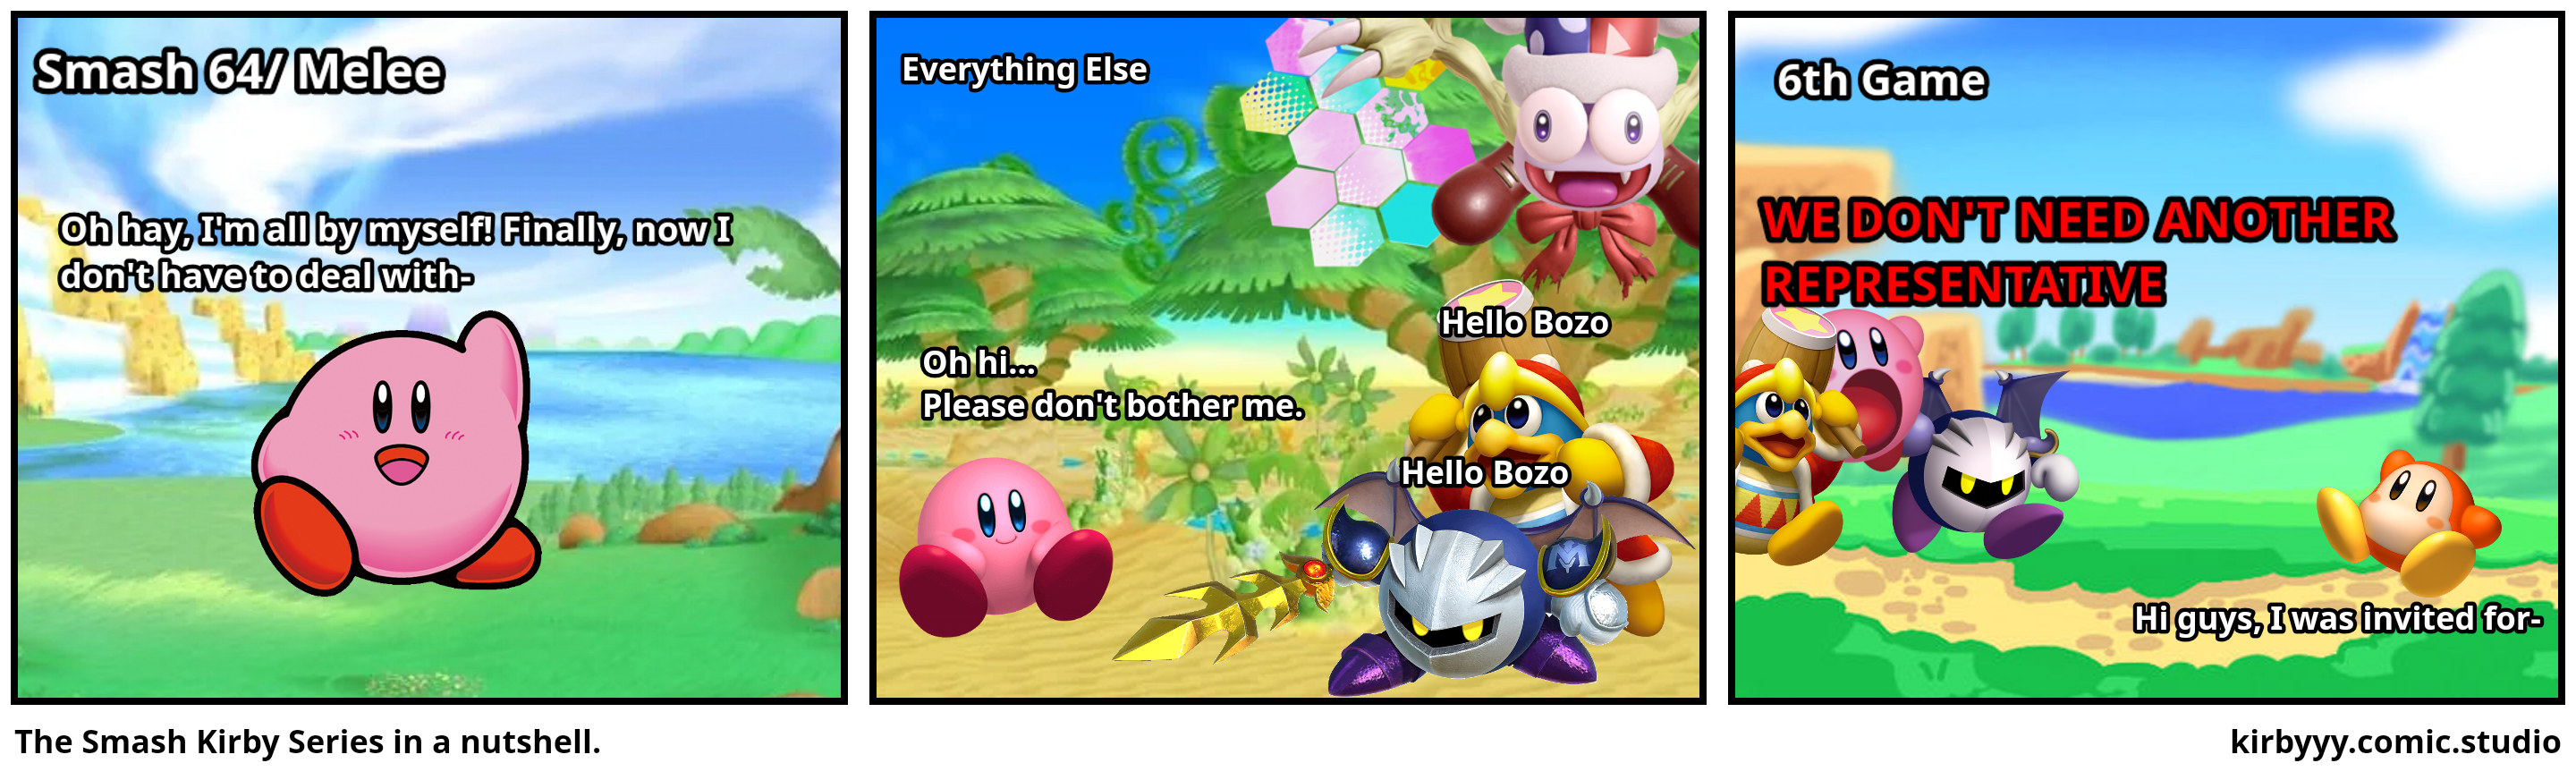 The Smash Kirby Series in a nutshell.